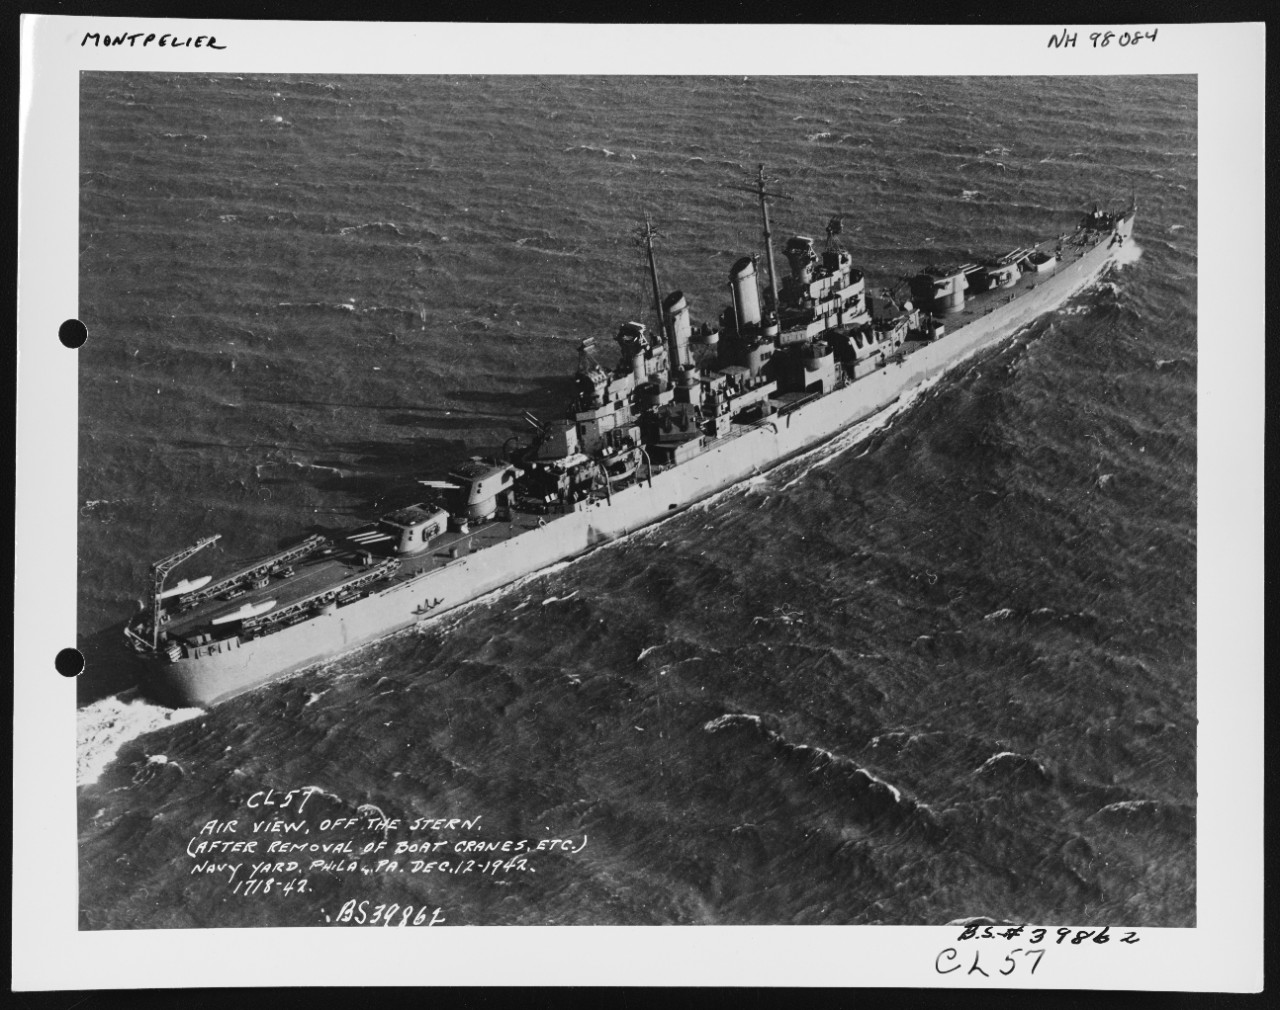 Photo #: NH 98084  USS Montpelier (CL-57)